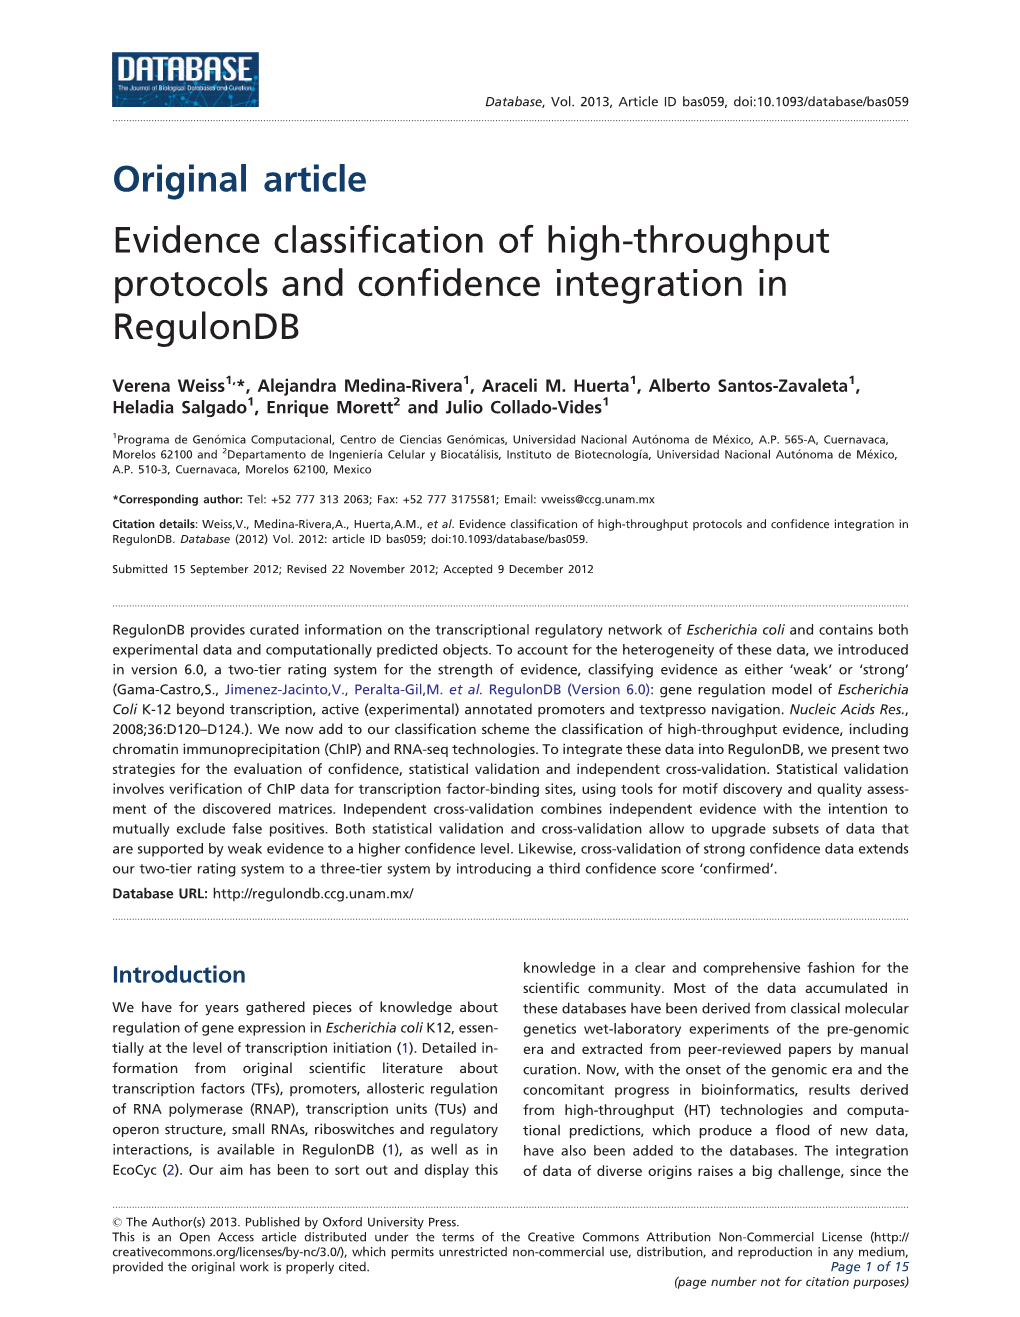 Original Article Evidence Classification of High-Throughput Protocols and Confidence Integration in Regulondb